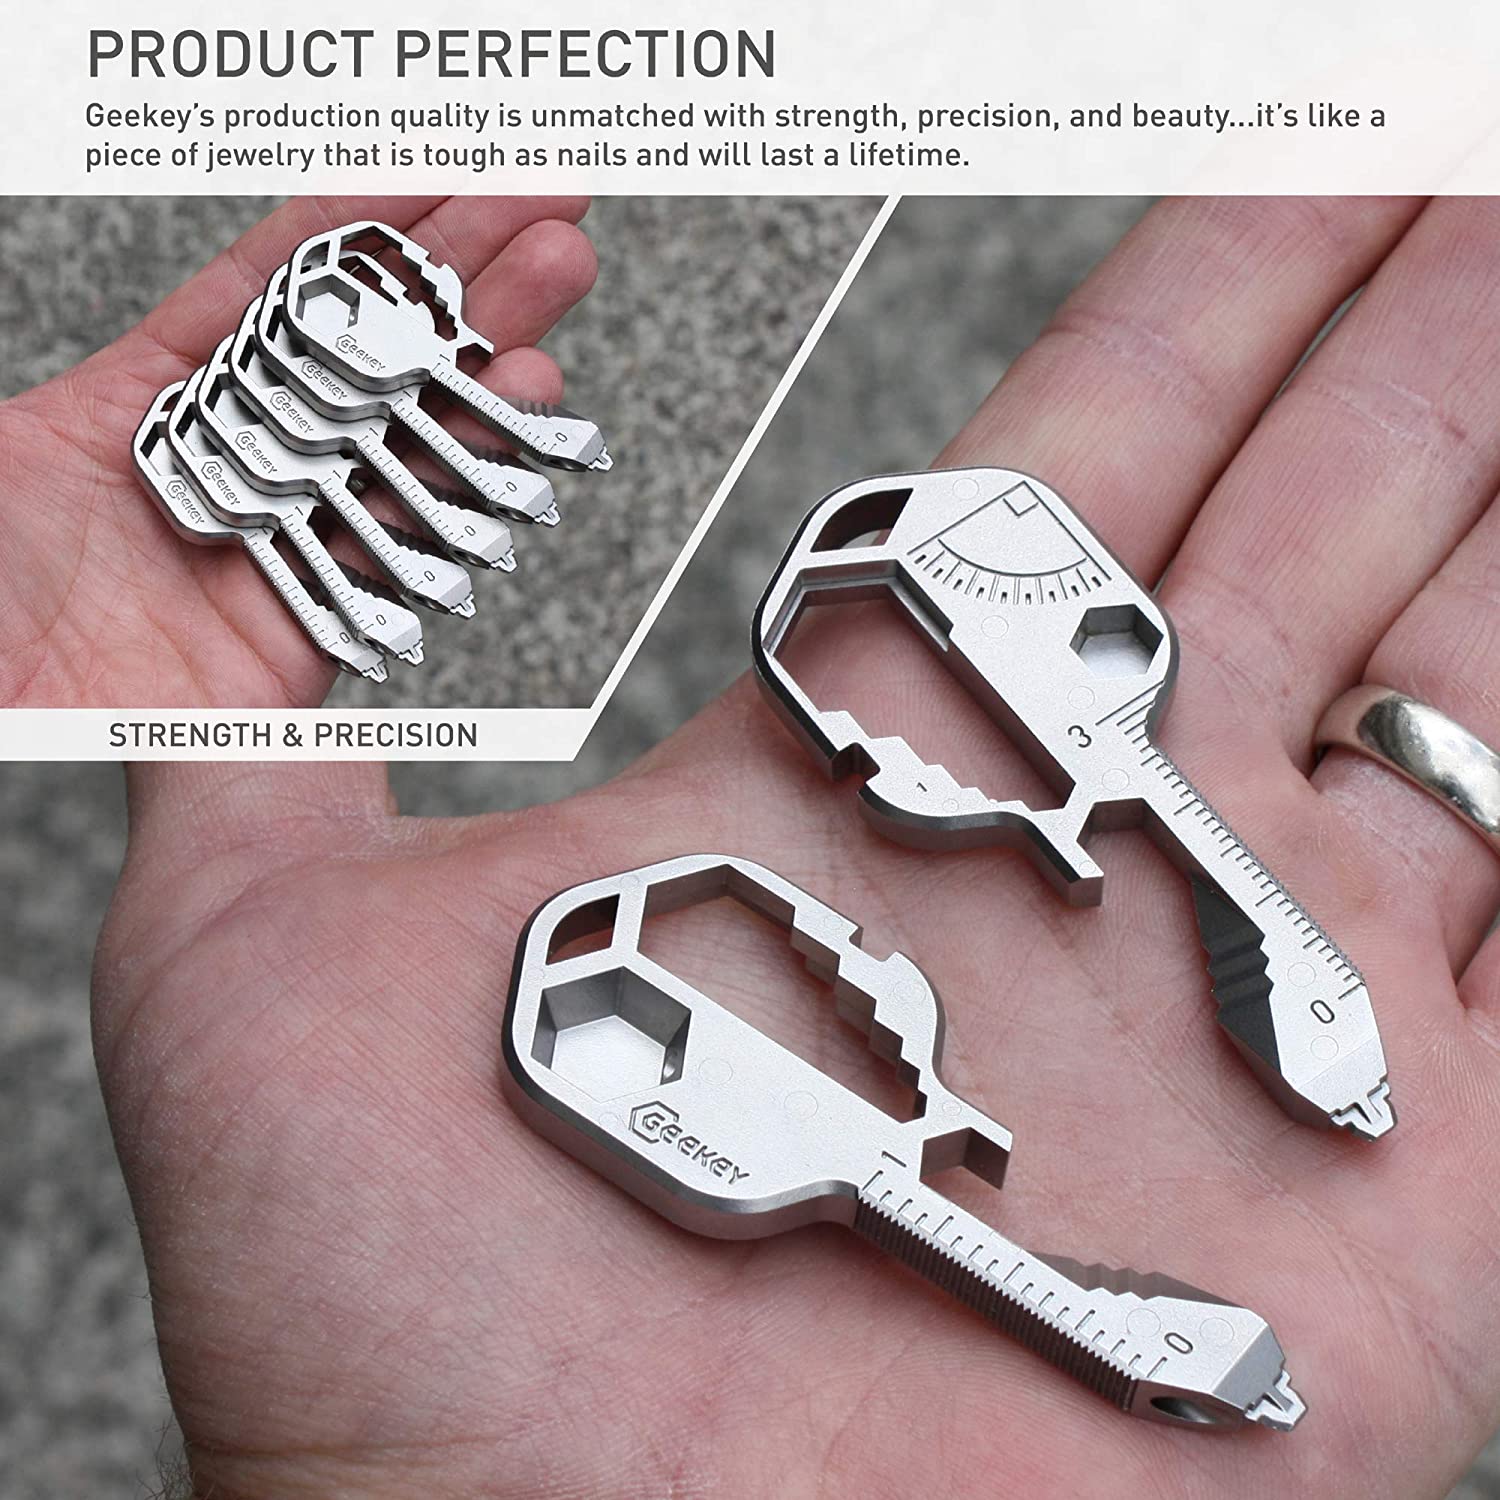 Several 16-in-1 multi tools are resting in the palm of a hand. The text reads, 'Geekey's production quality is unmatched with strength, precision and beauty... Its like a piece of jewelry that is tough as mails and will last a lifetime.'